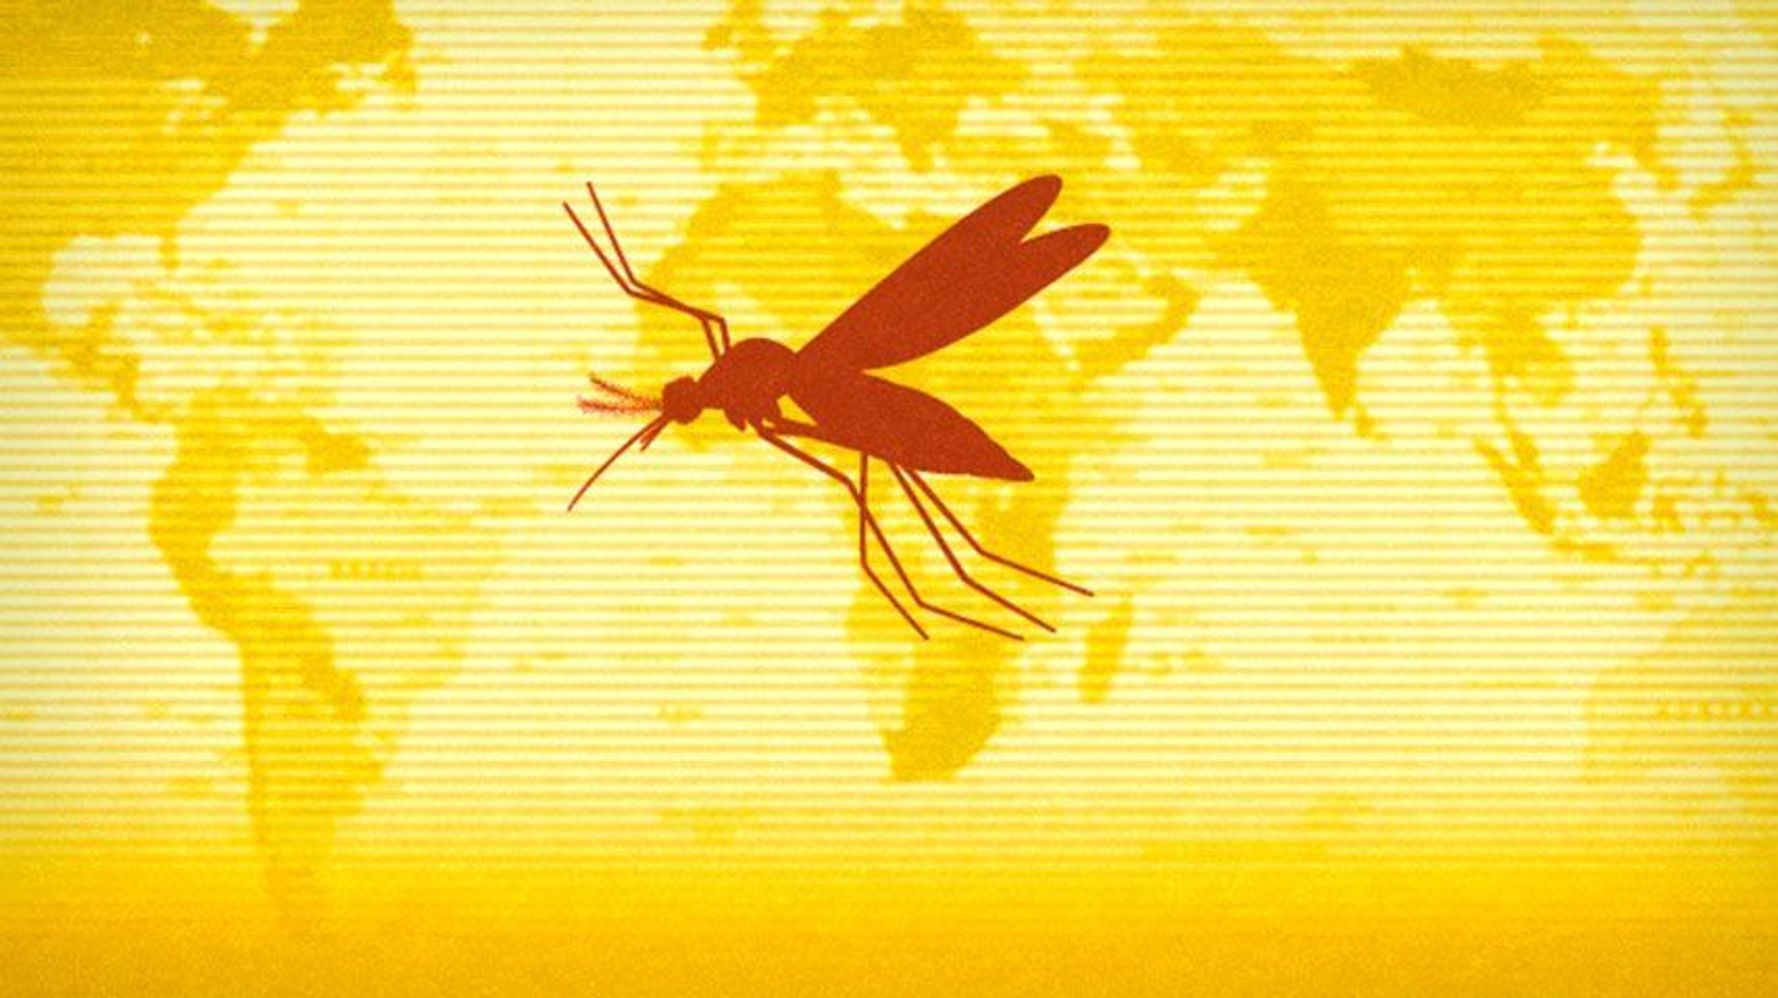 Yellow Fever Outbreak In Brazil Has Ended With 261 Deaths | HuffPost